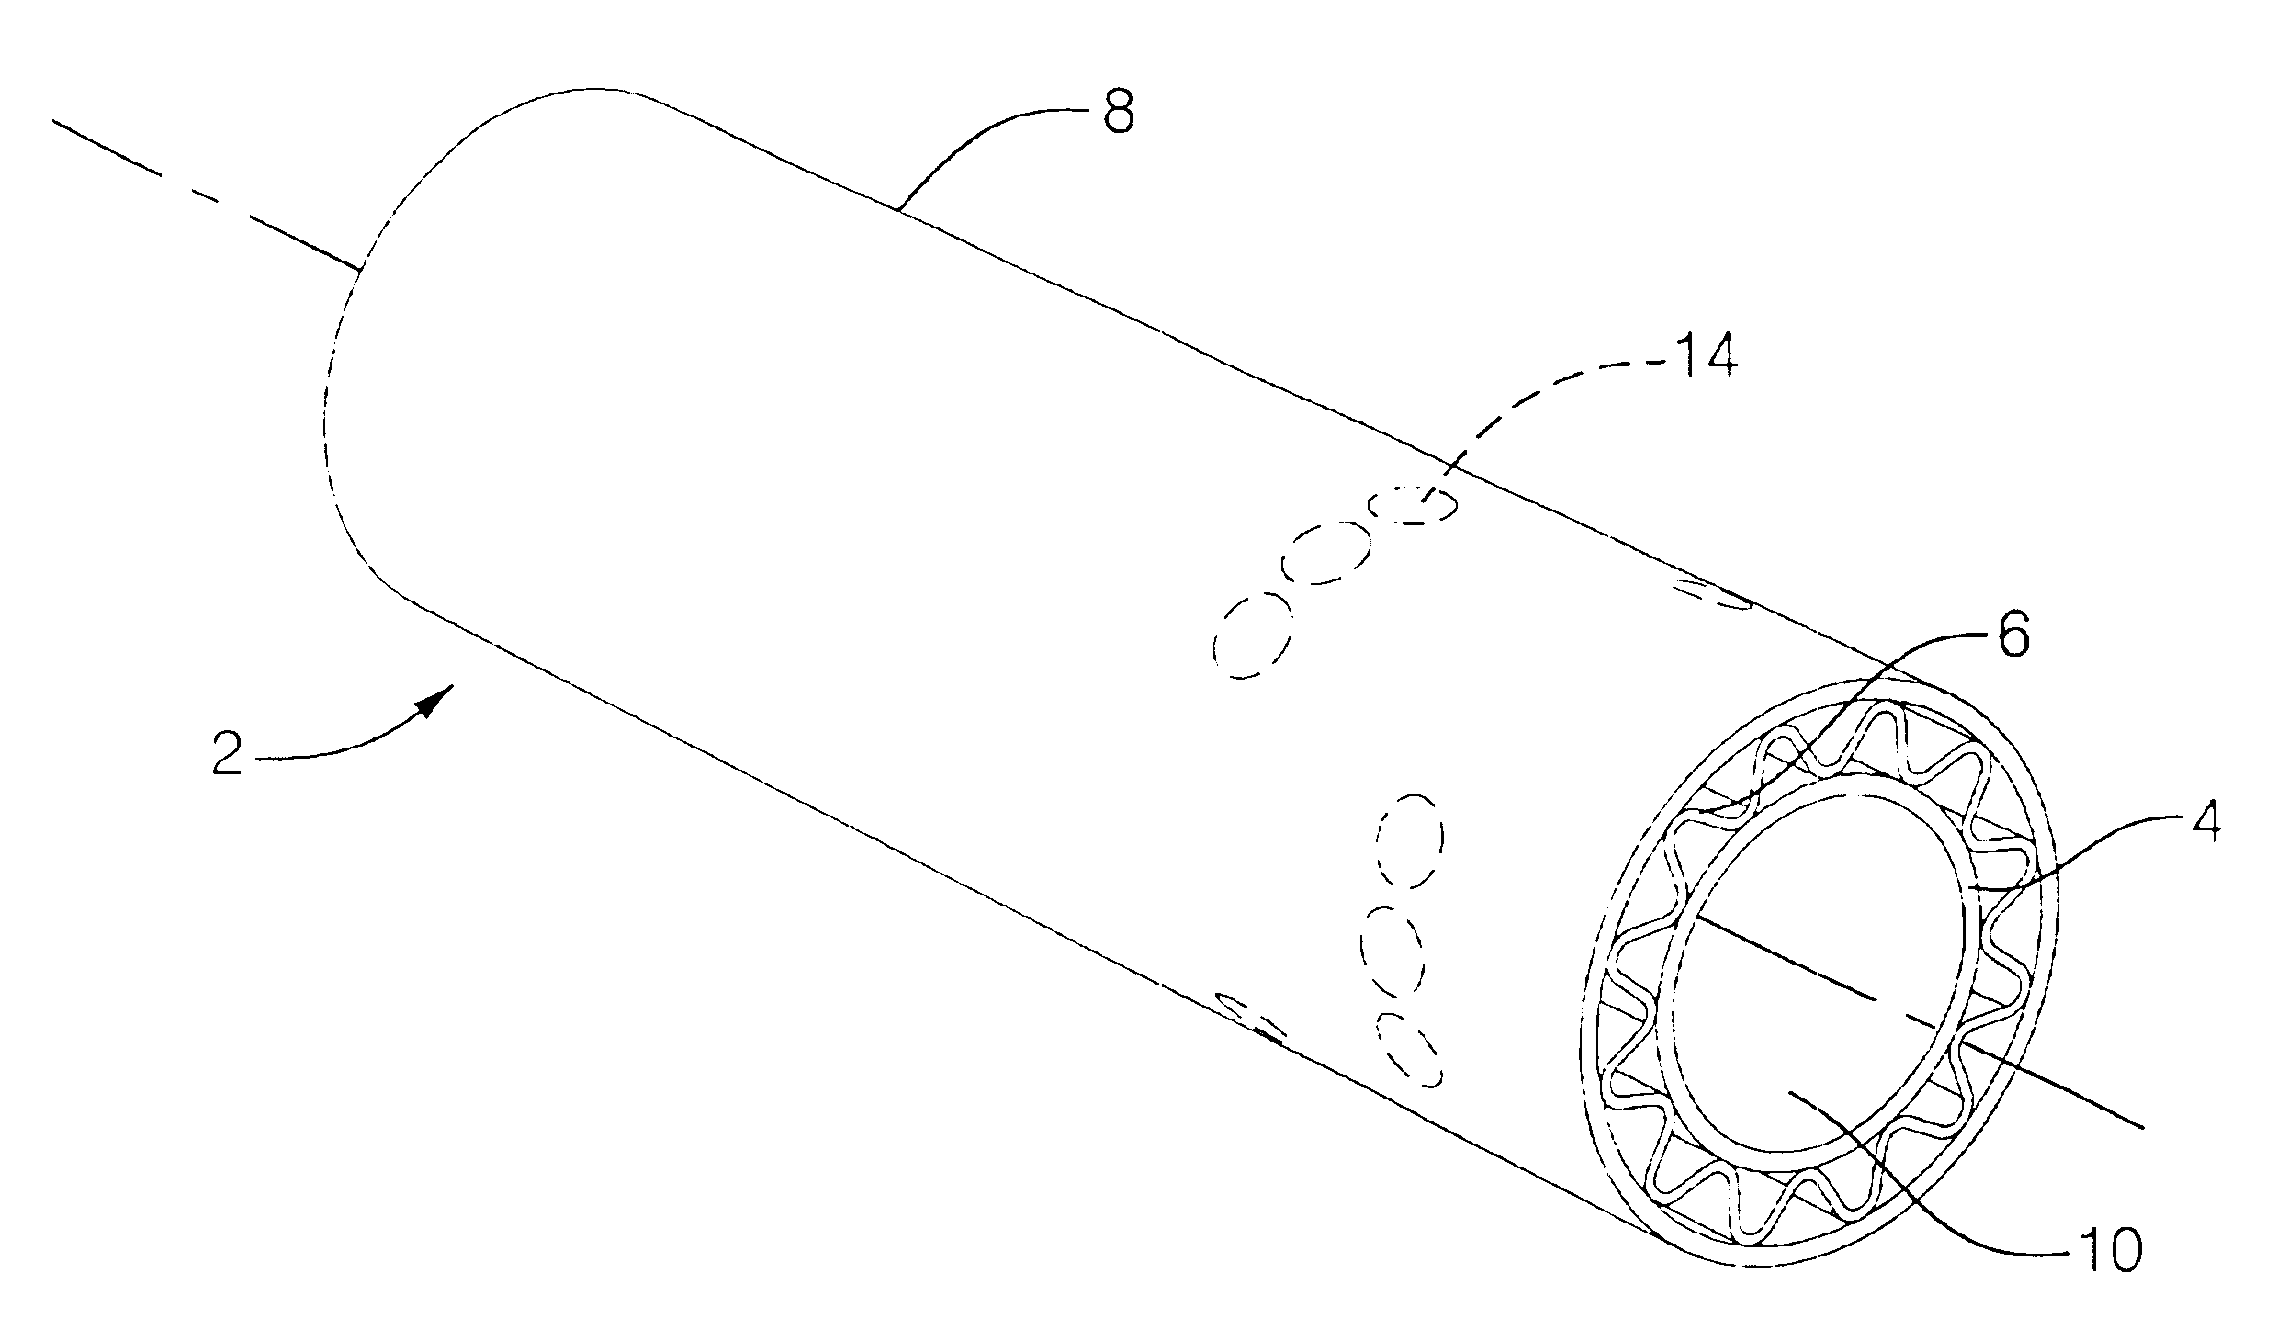 Modified contoured crushable structural members and methods for making the same